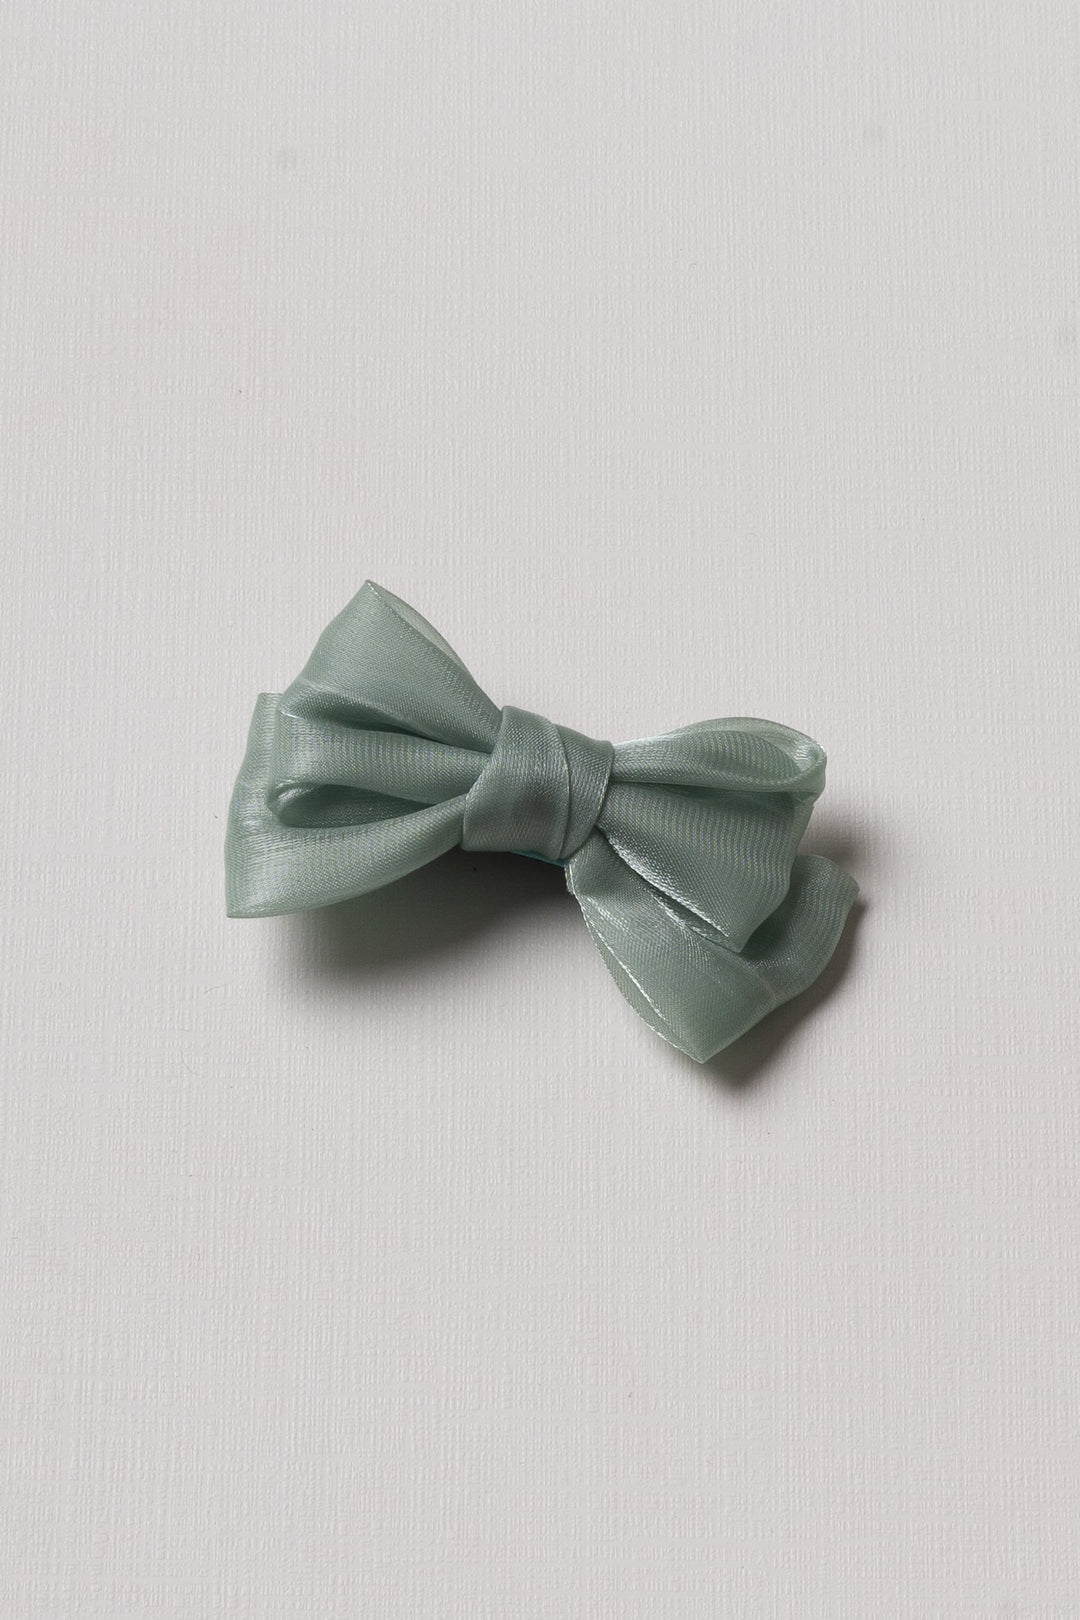 The Nesavu Hair Clip Sleek Sage Bow: The Perfect Touch of Grace for Her Hair Nesavu Green JHCL77B Elegant Sage Green Satin Bow Clip | Chic Hair Accessory for Graceful Styles | The Nesavu